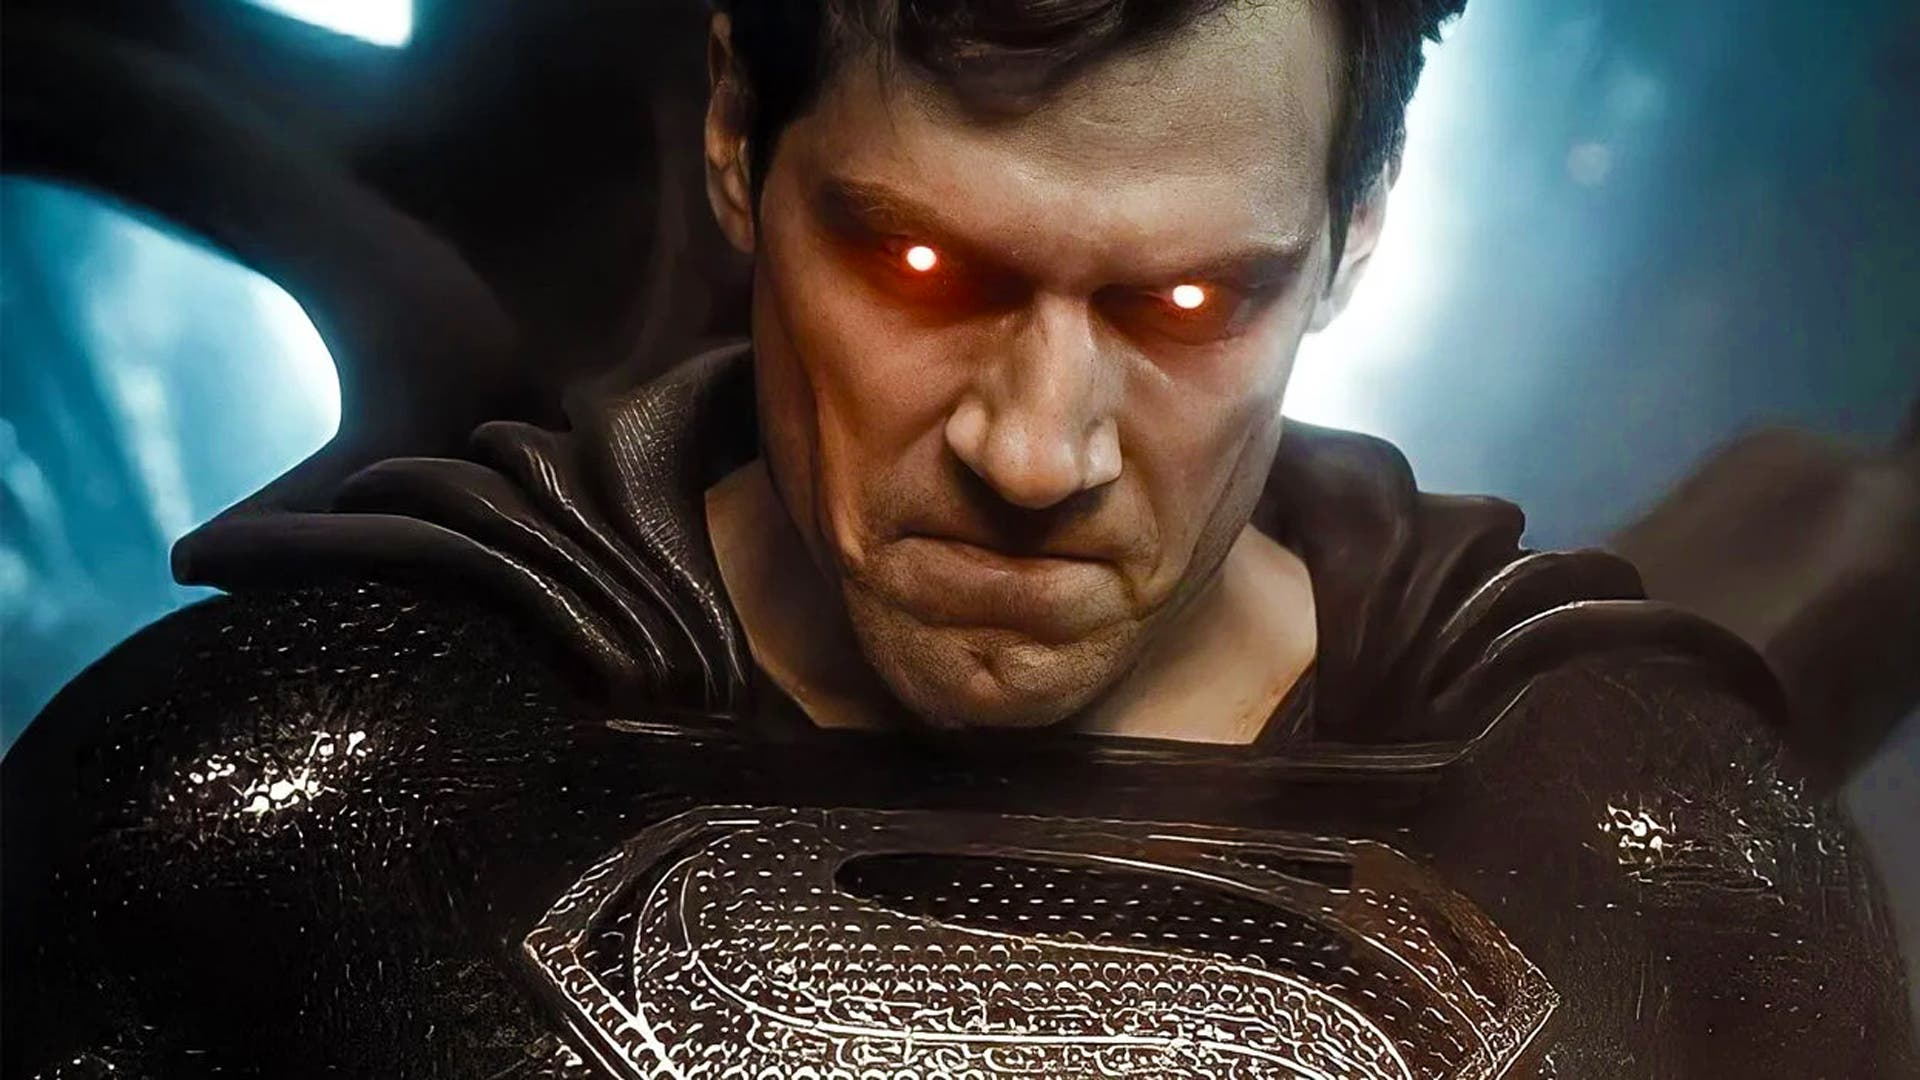 Henry Cavill Should Be Furious At The Rock For Killing Any Chance At A Superman Return